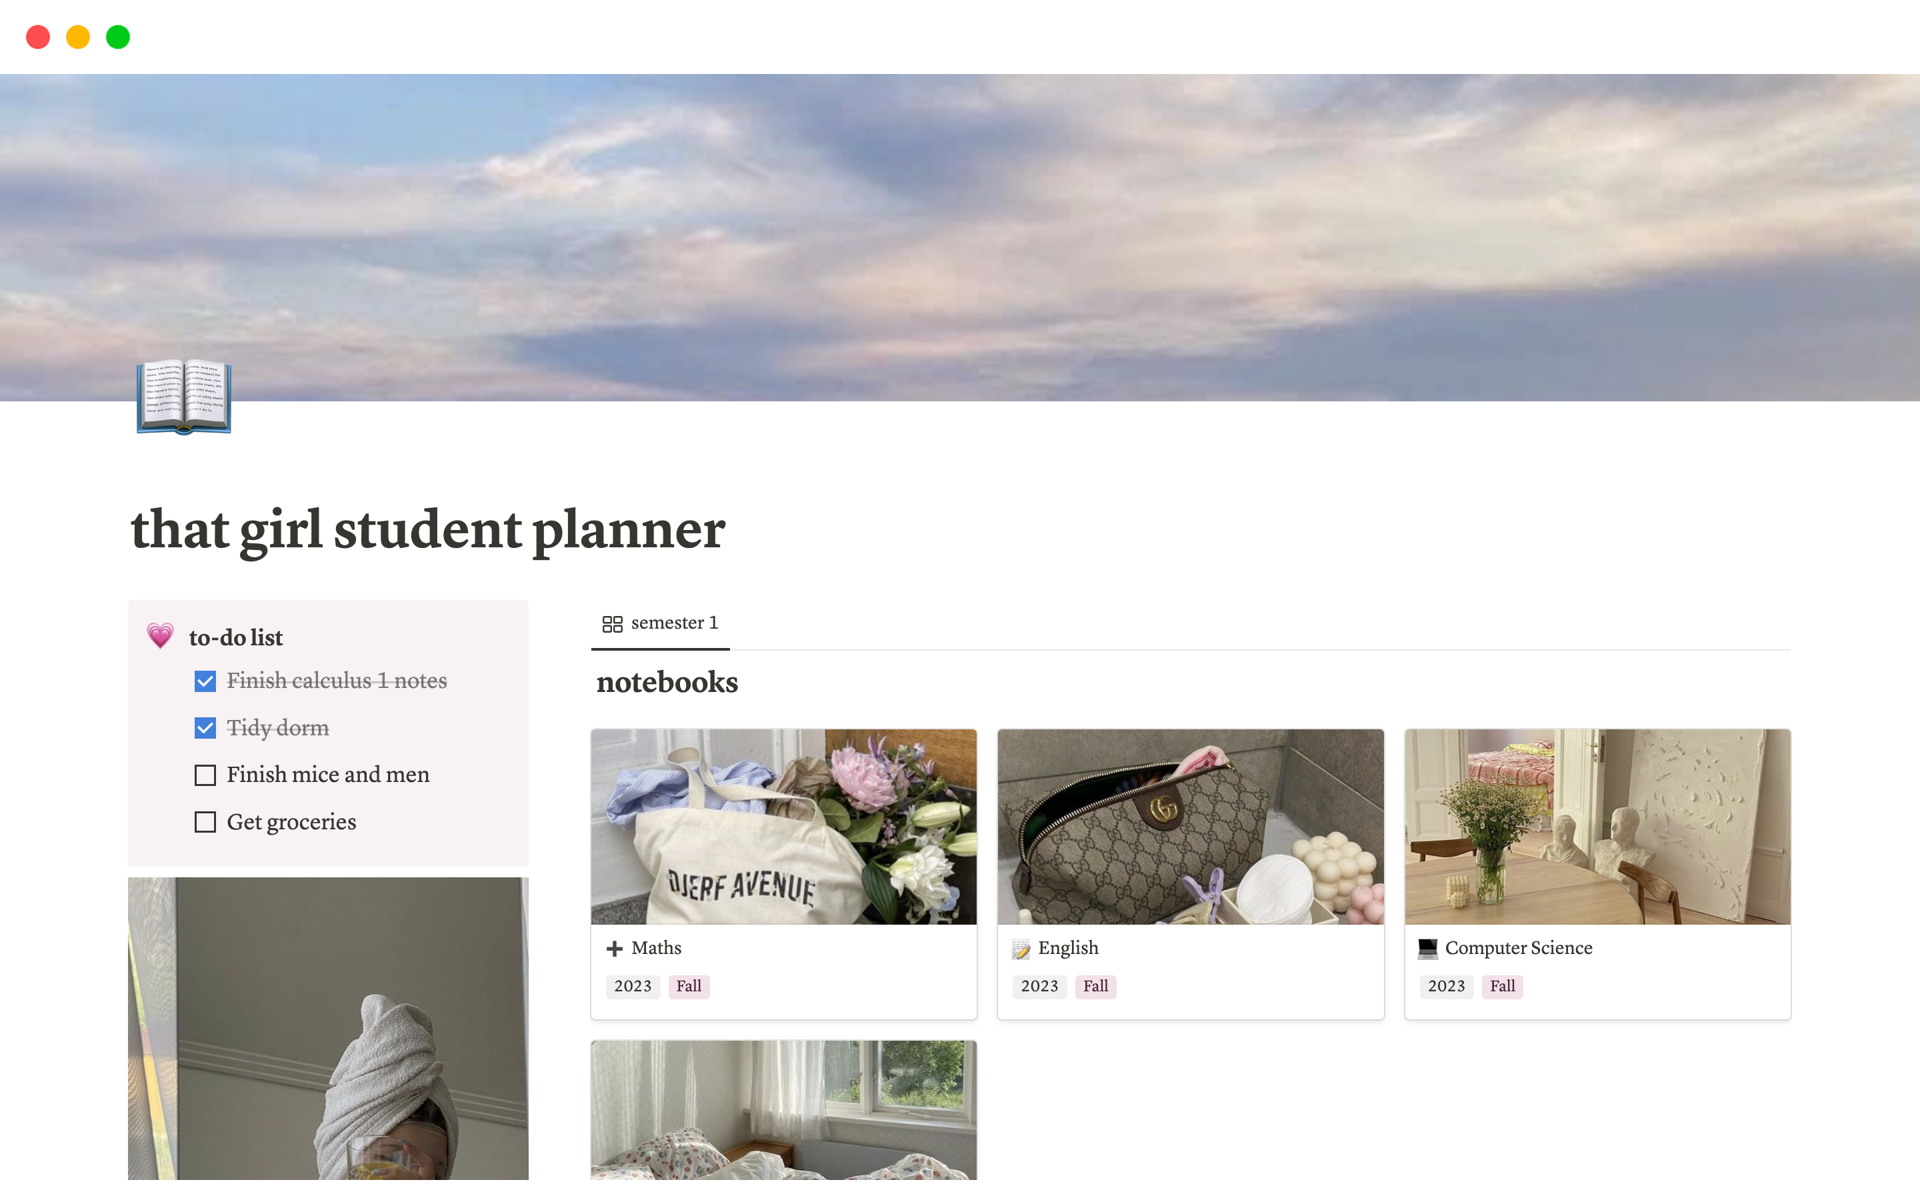 Organise your assignments, projects, clubs, and to-dos with an aesthetic, that girl themed Notion template for students.